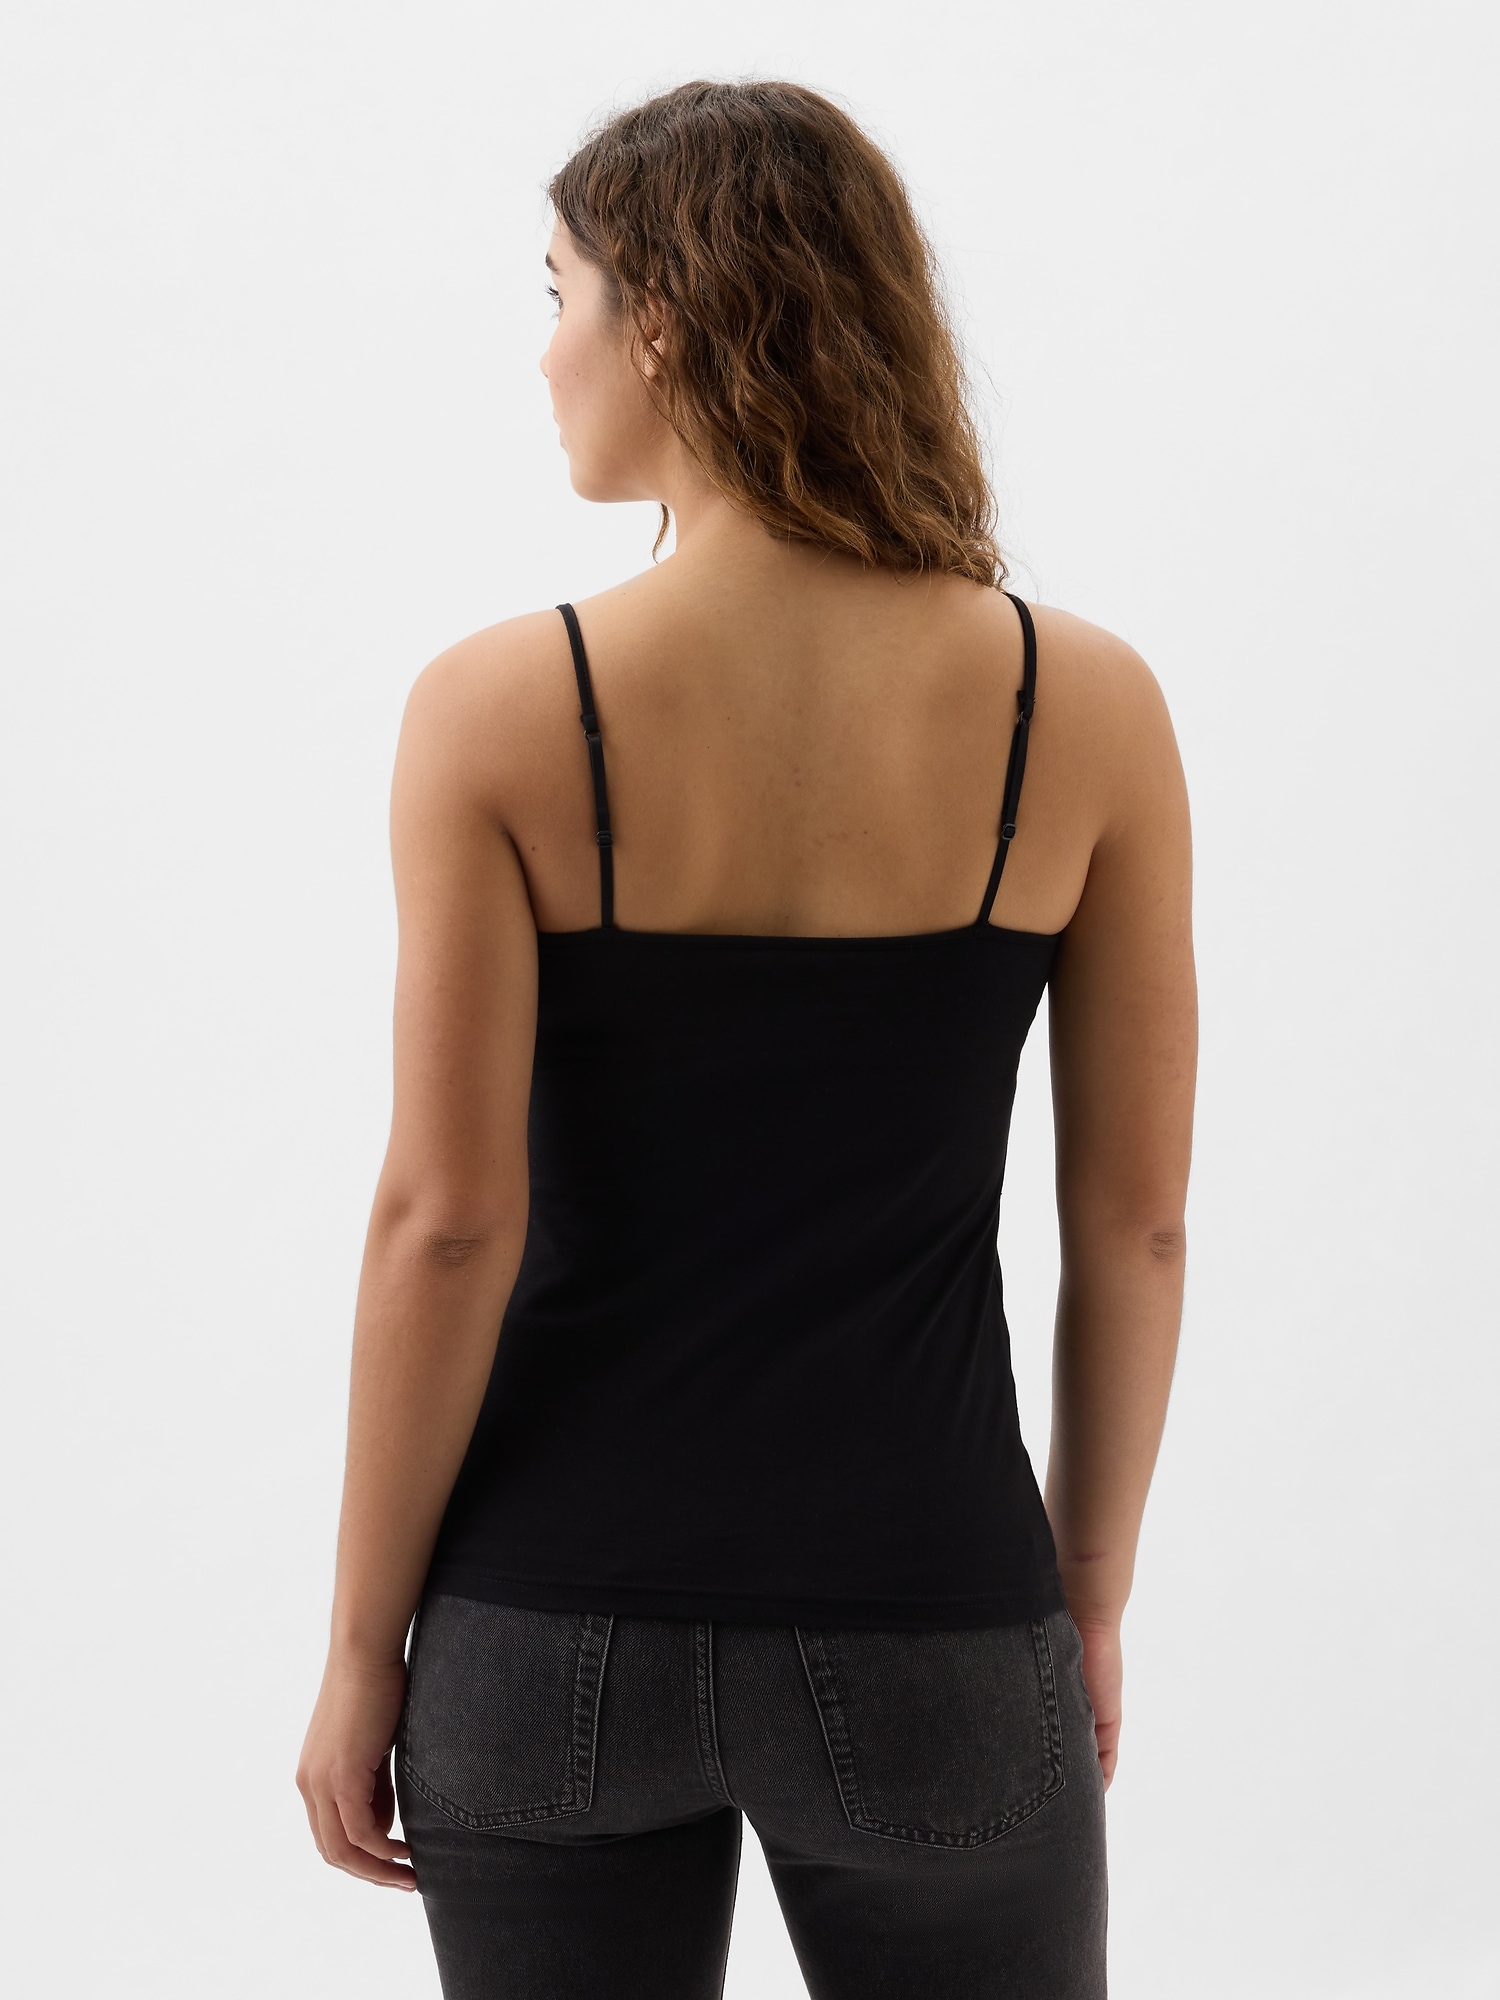 FIT Everyday Cotton Camisole with Shelf Bra